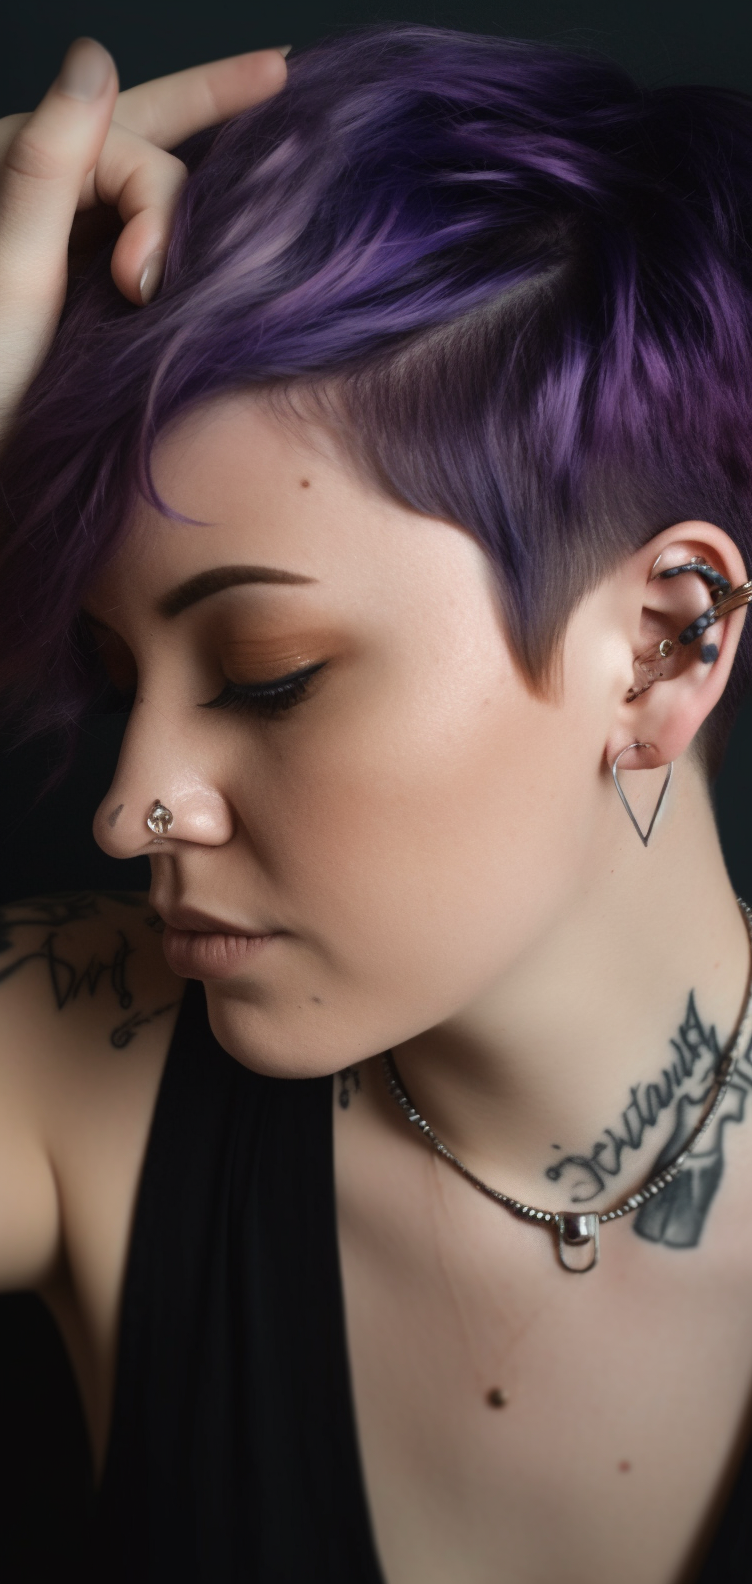 Jen_Palmer_a_woman_with_short_purple_hair_holding_back_her_hair_75449ea0-d138-49e3-8d27-77298dc44572.png